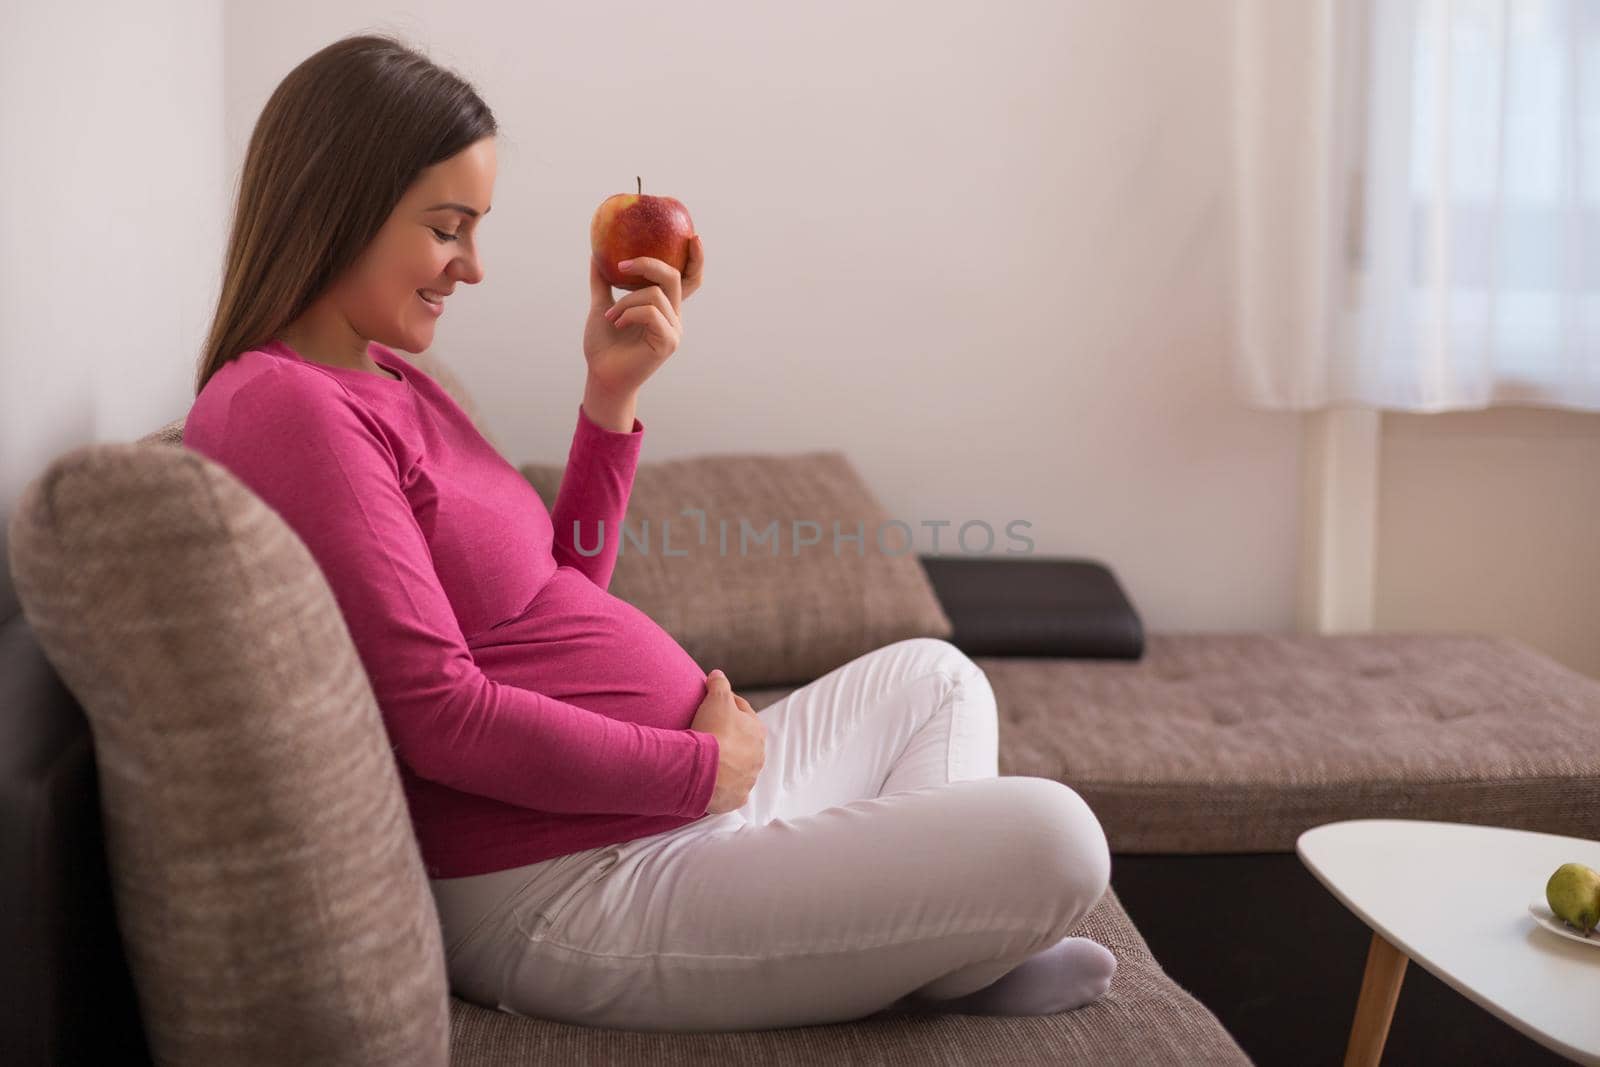 Happy pregnant woman eating apple.